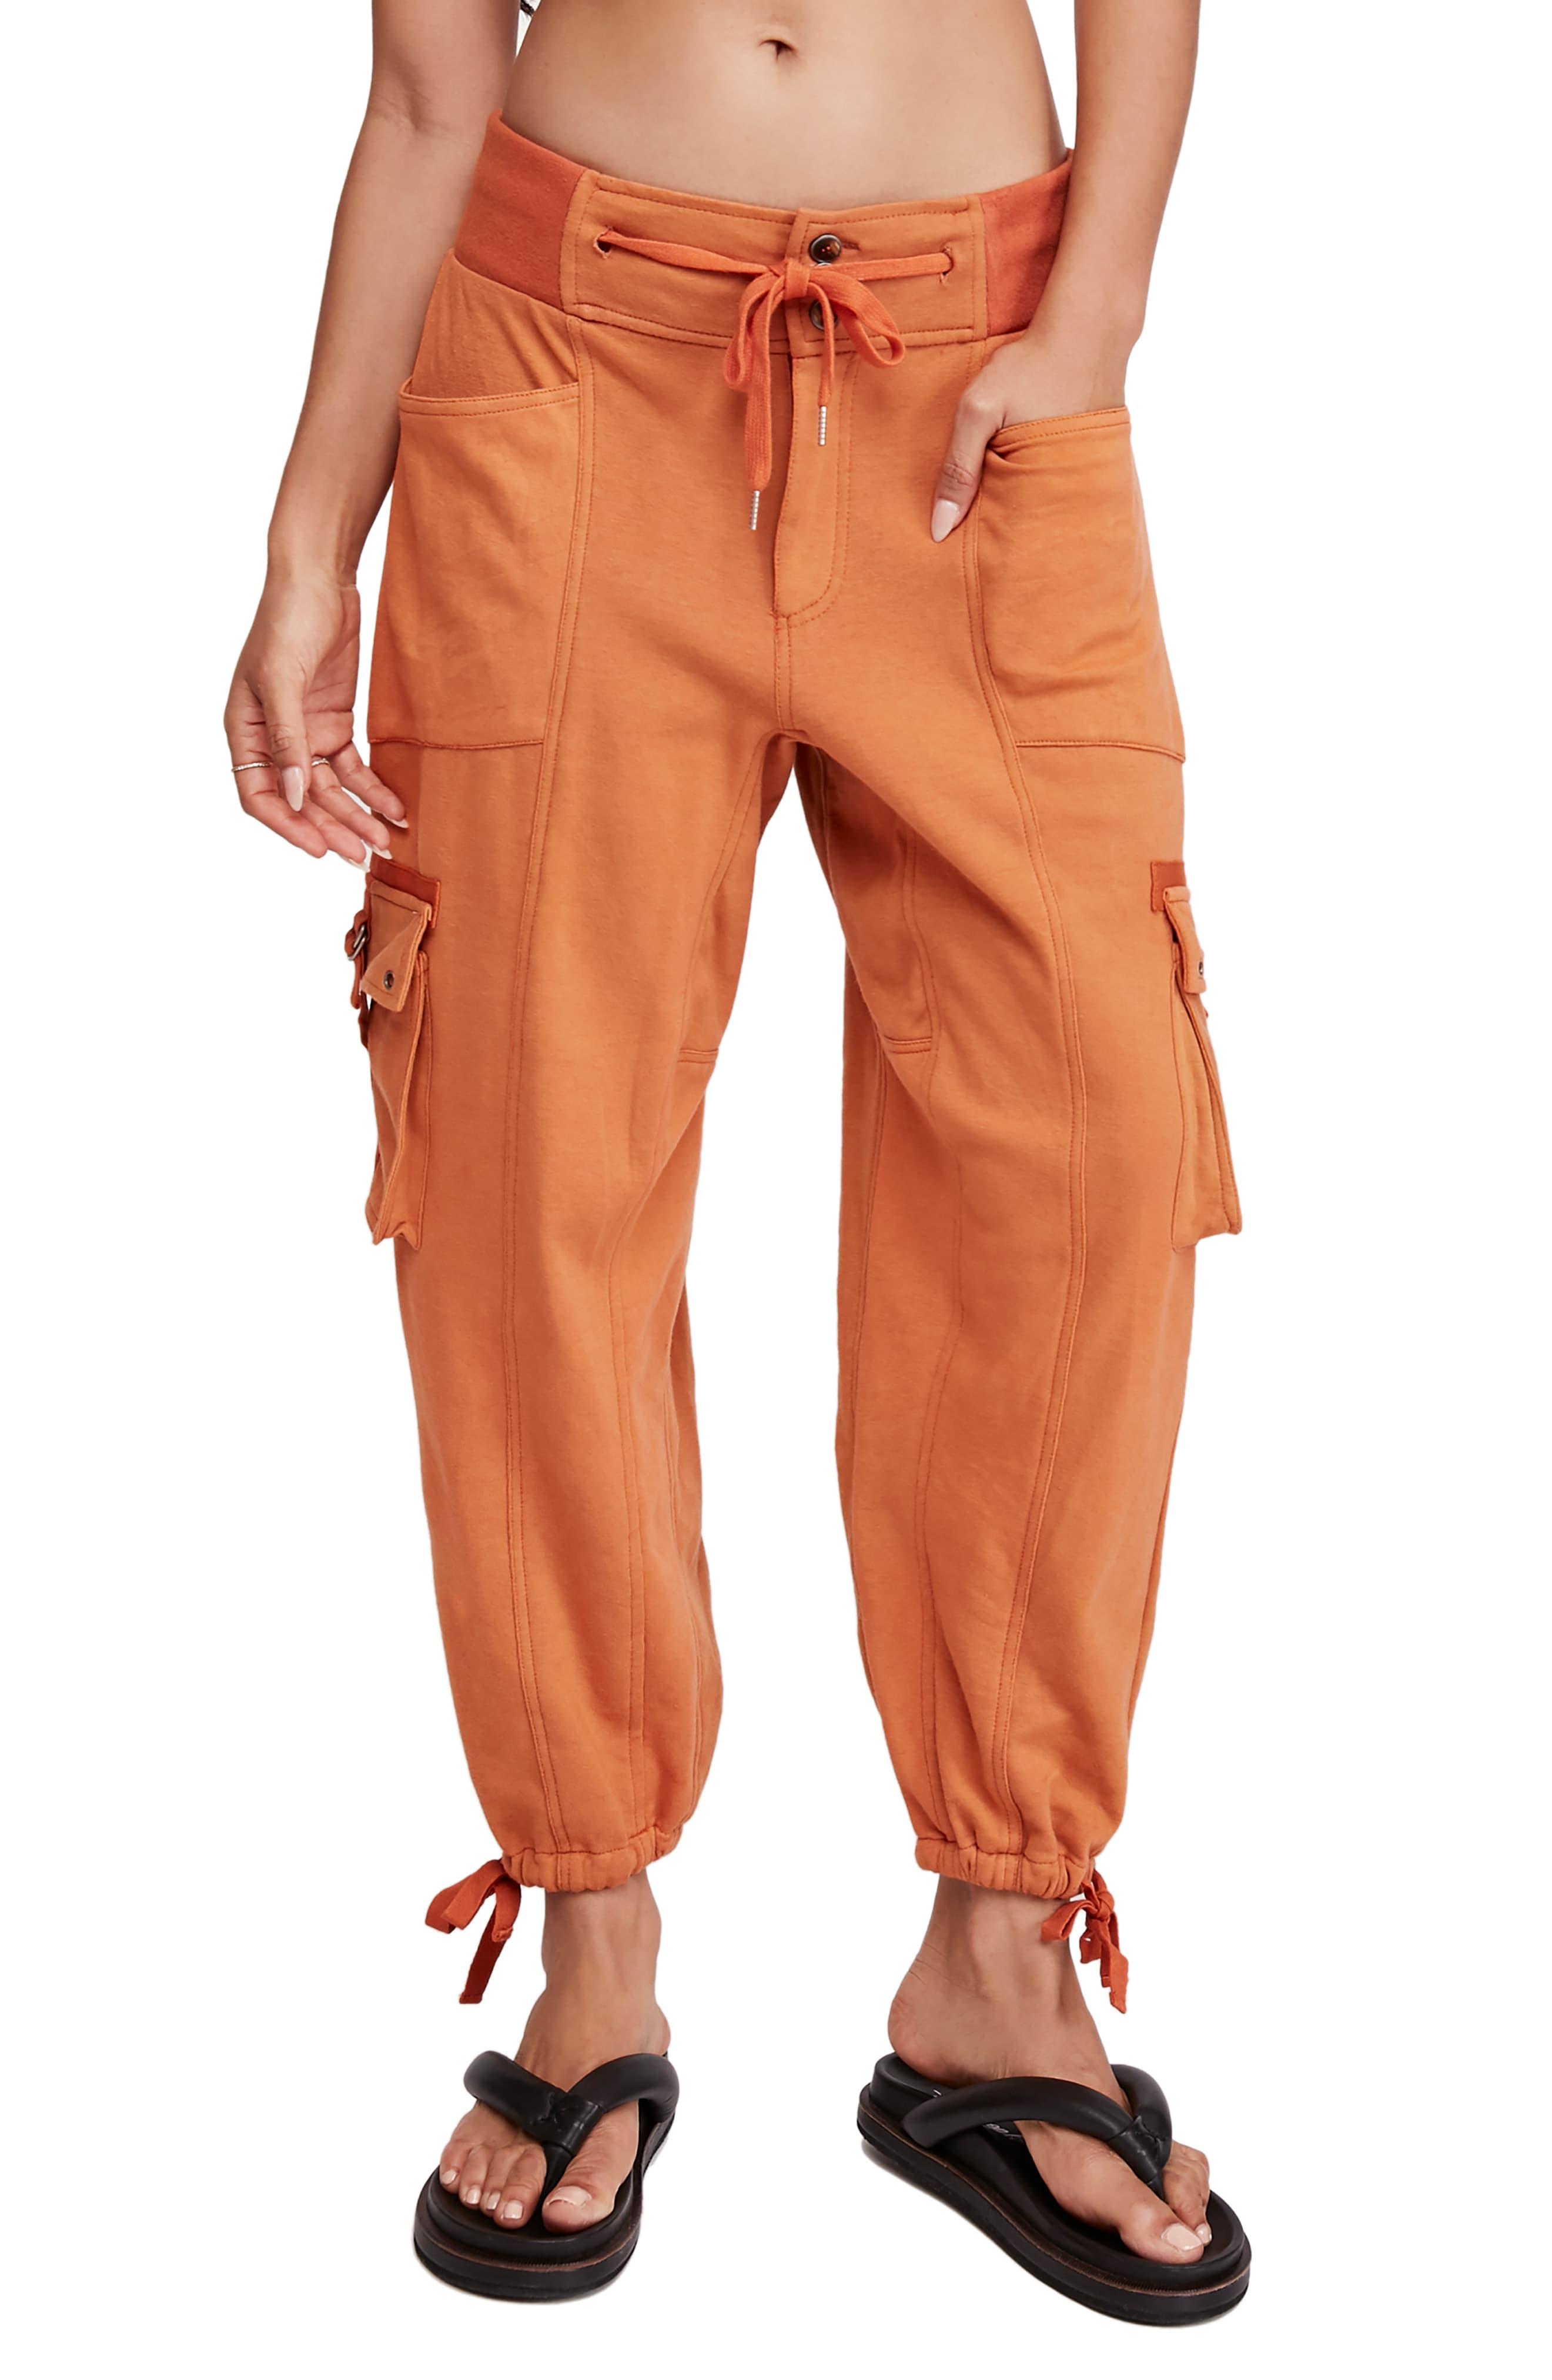 Free People Semi Charmed Jogger Pants in Orange - Save 41% - Lyst